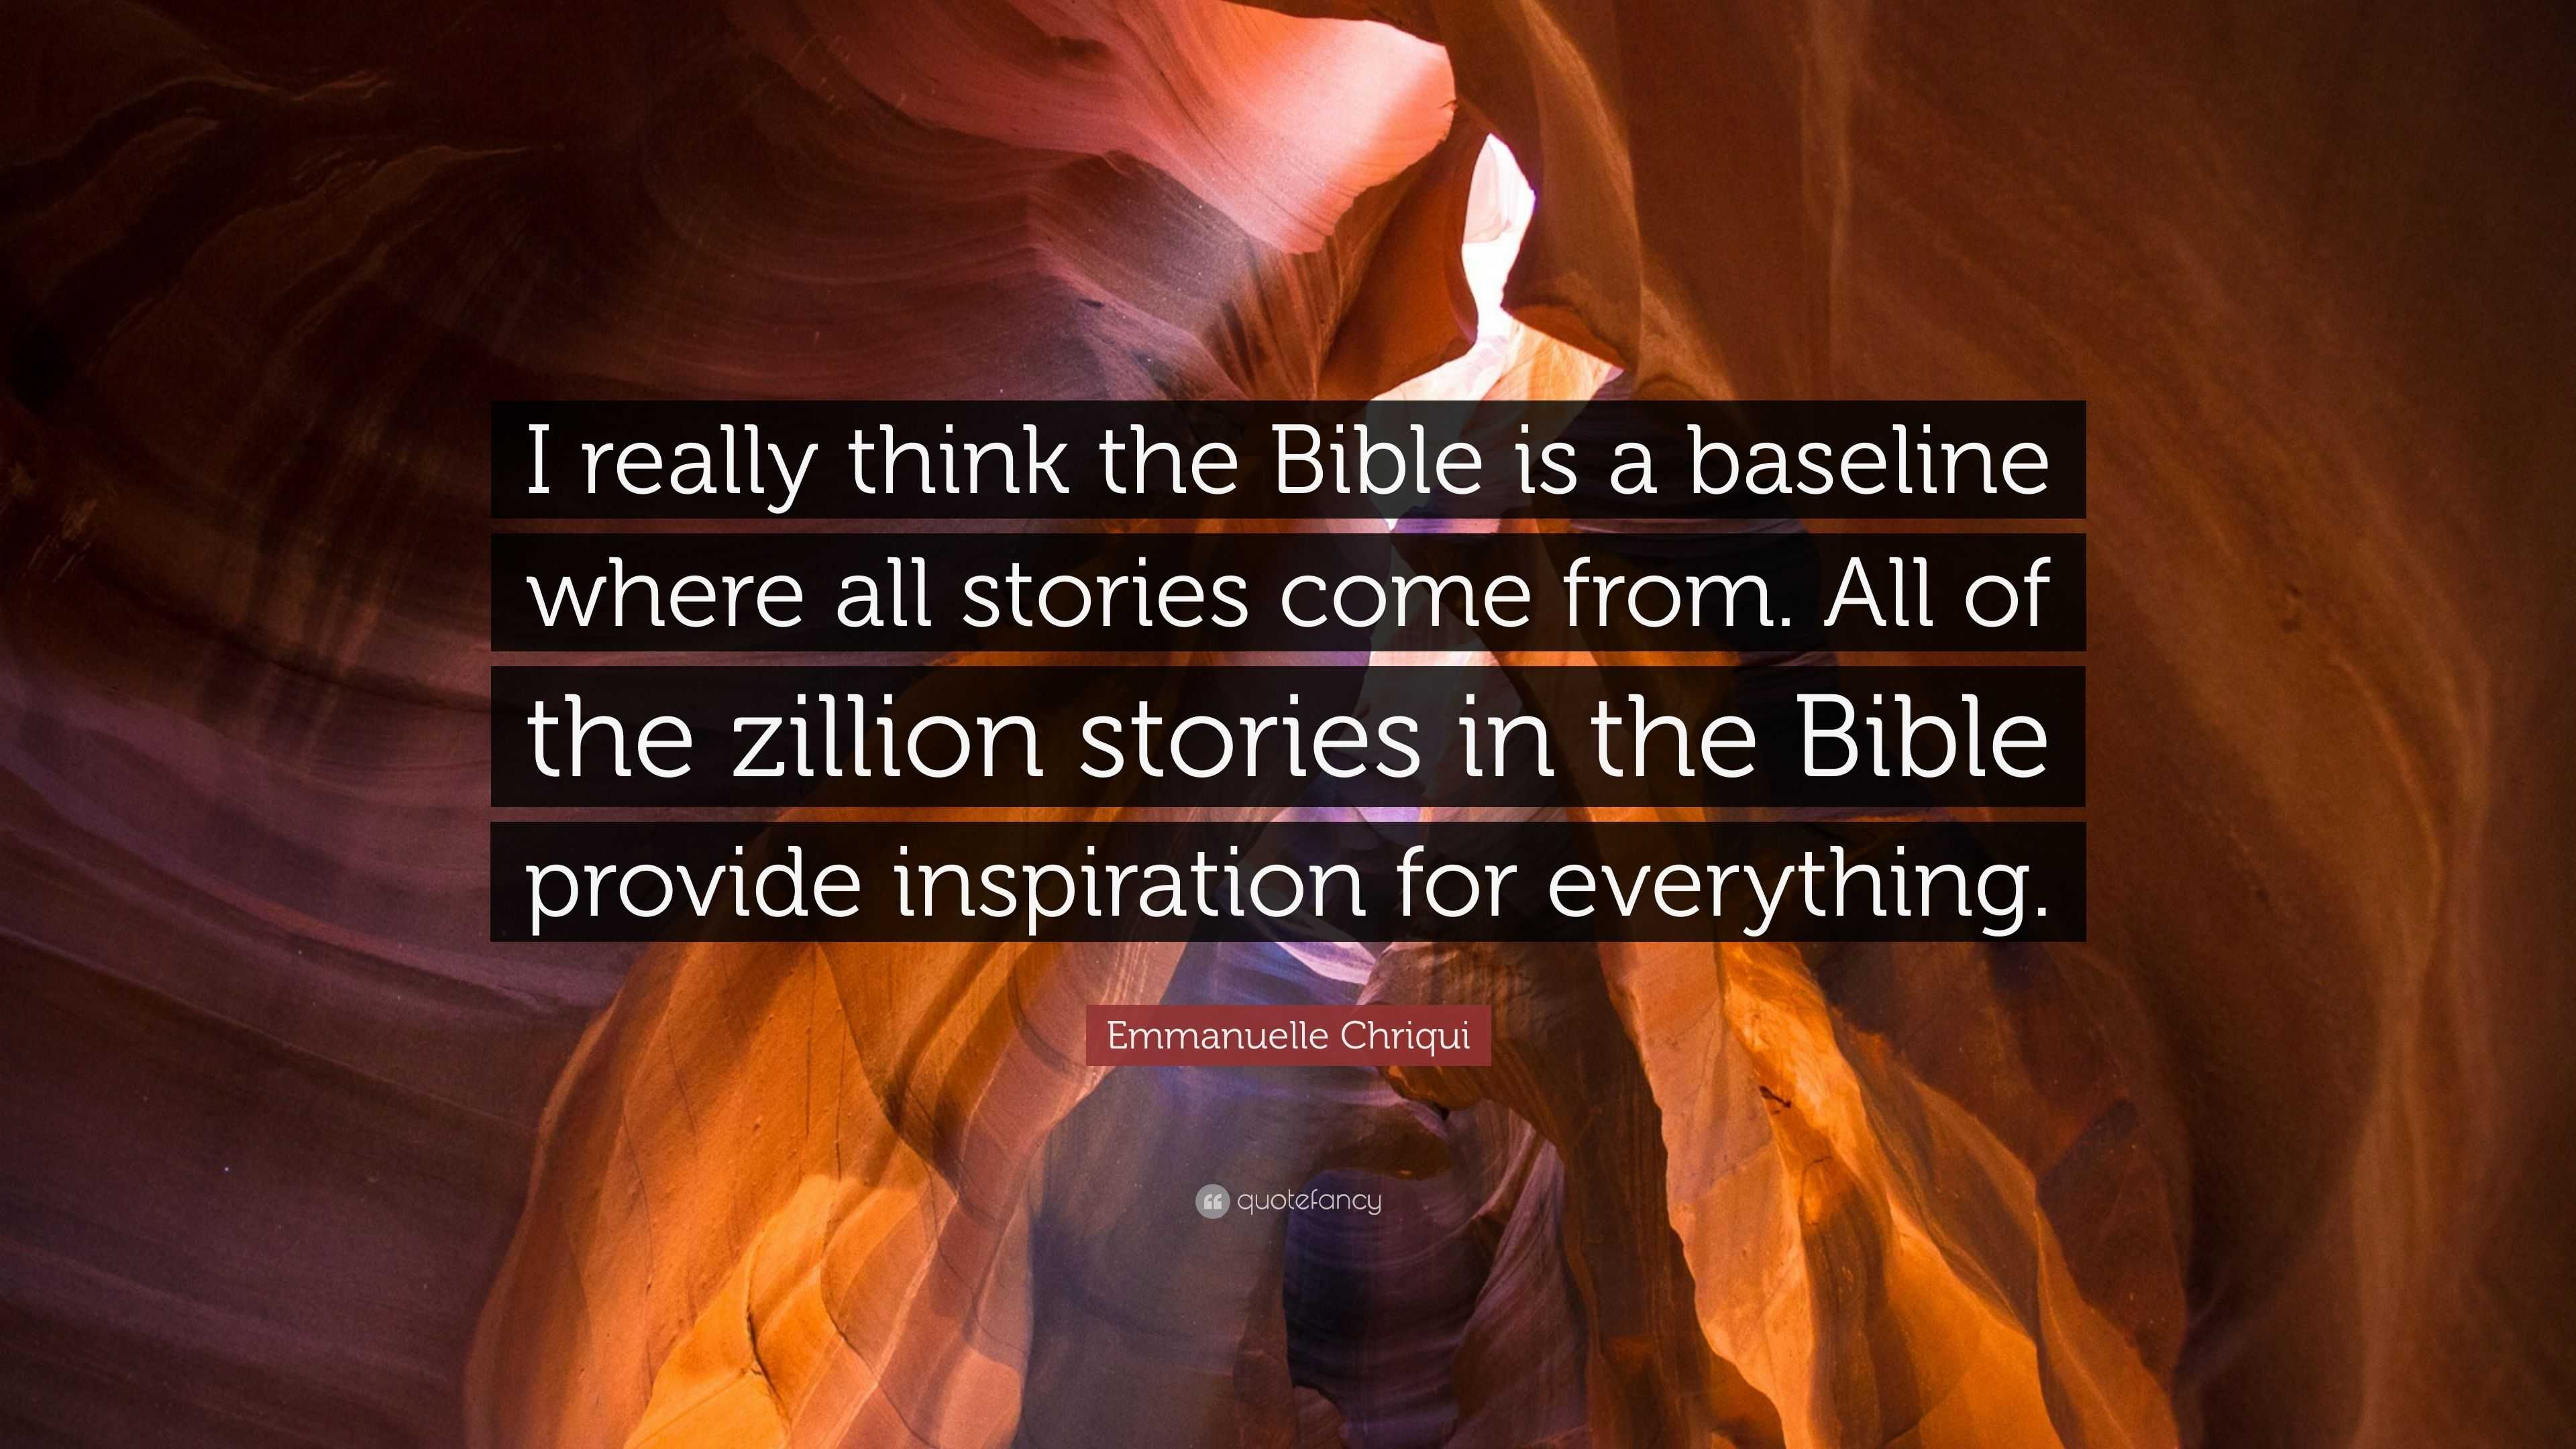 Emmanuelle Chriqui Quote: “I really think the Bible is a baseline where ...